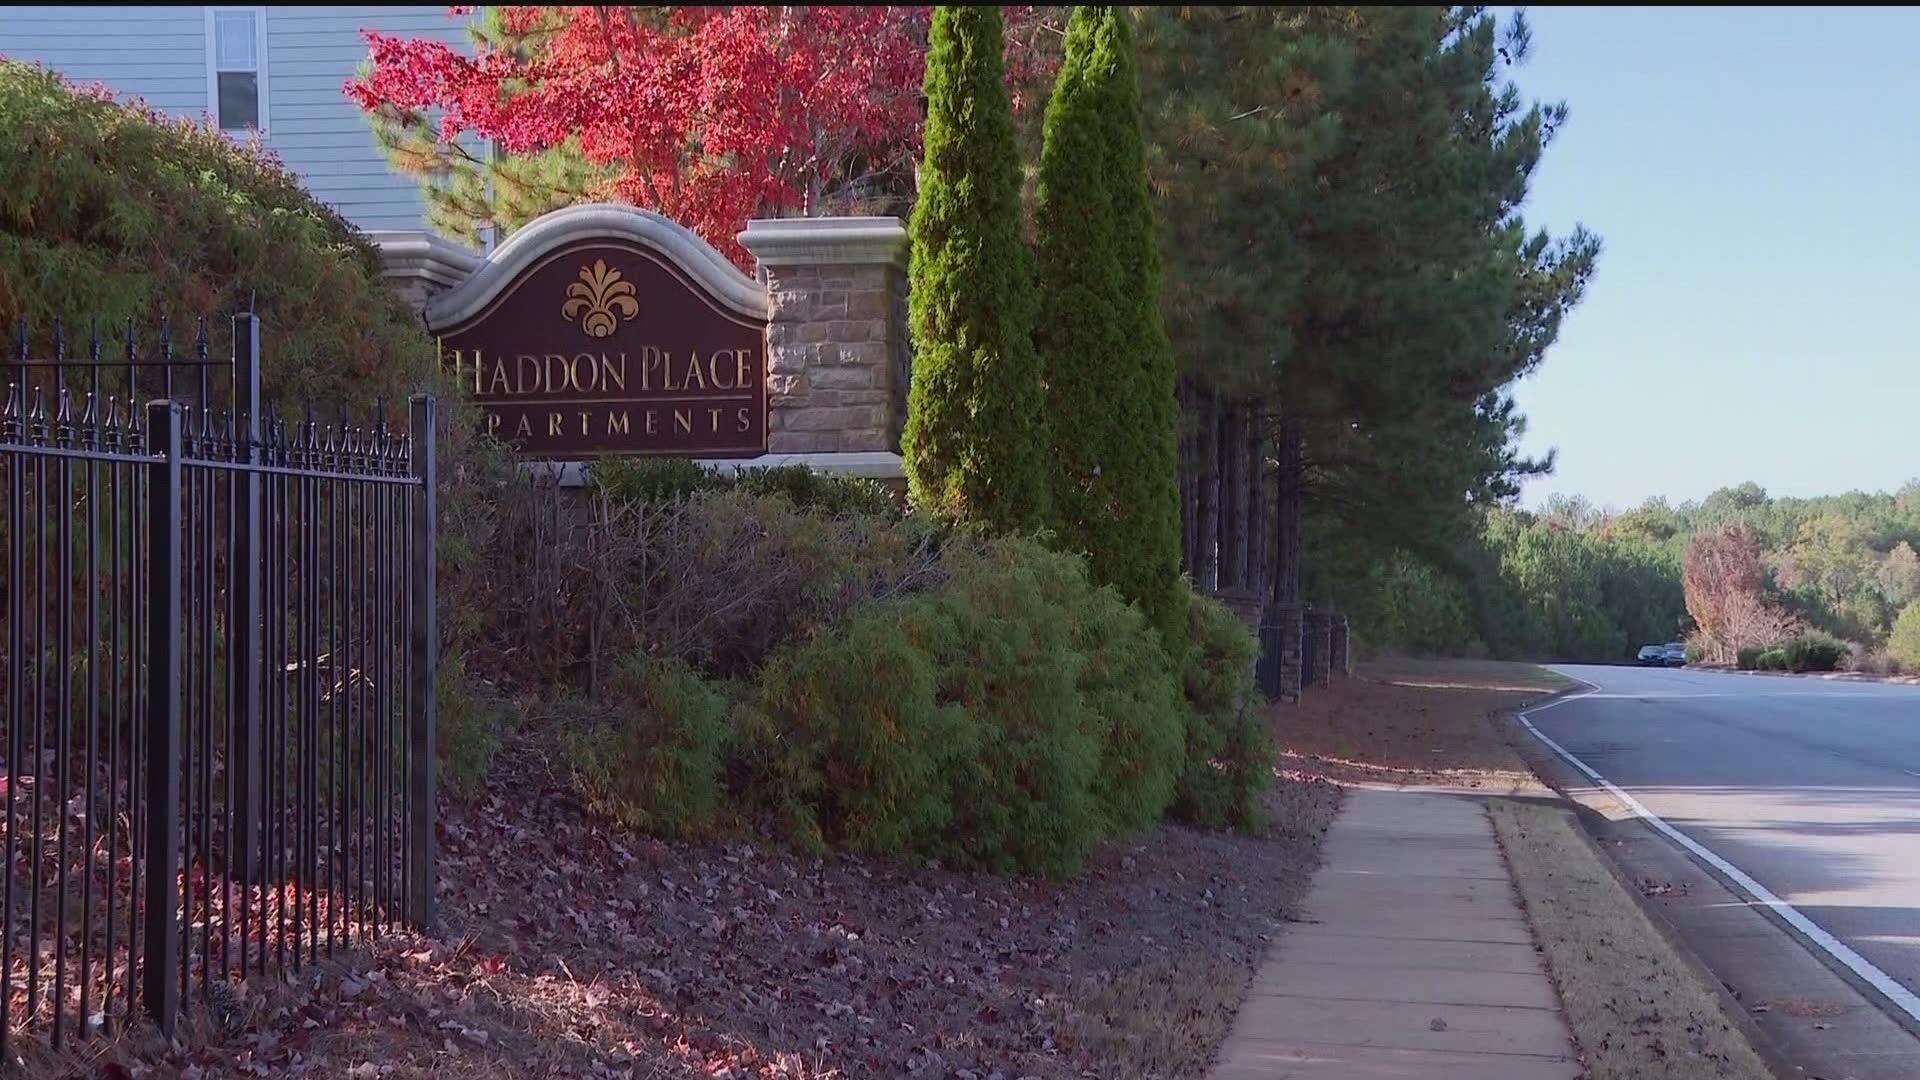 A detention officer is critically hurt after being shot at a McDonough apartment complex Friday afternoon and a manhunt for a 32-year-old is now underway.